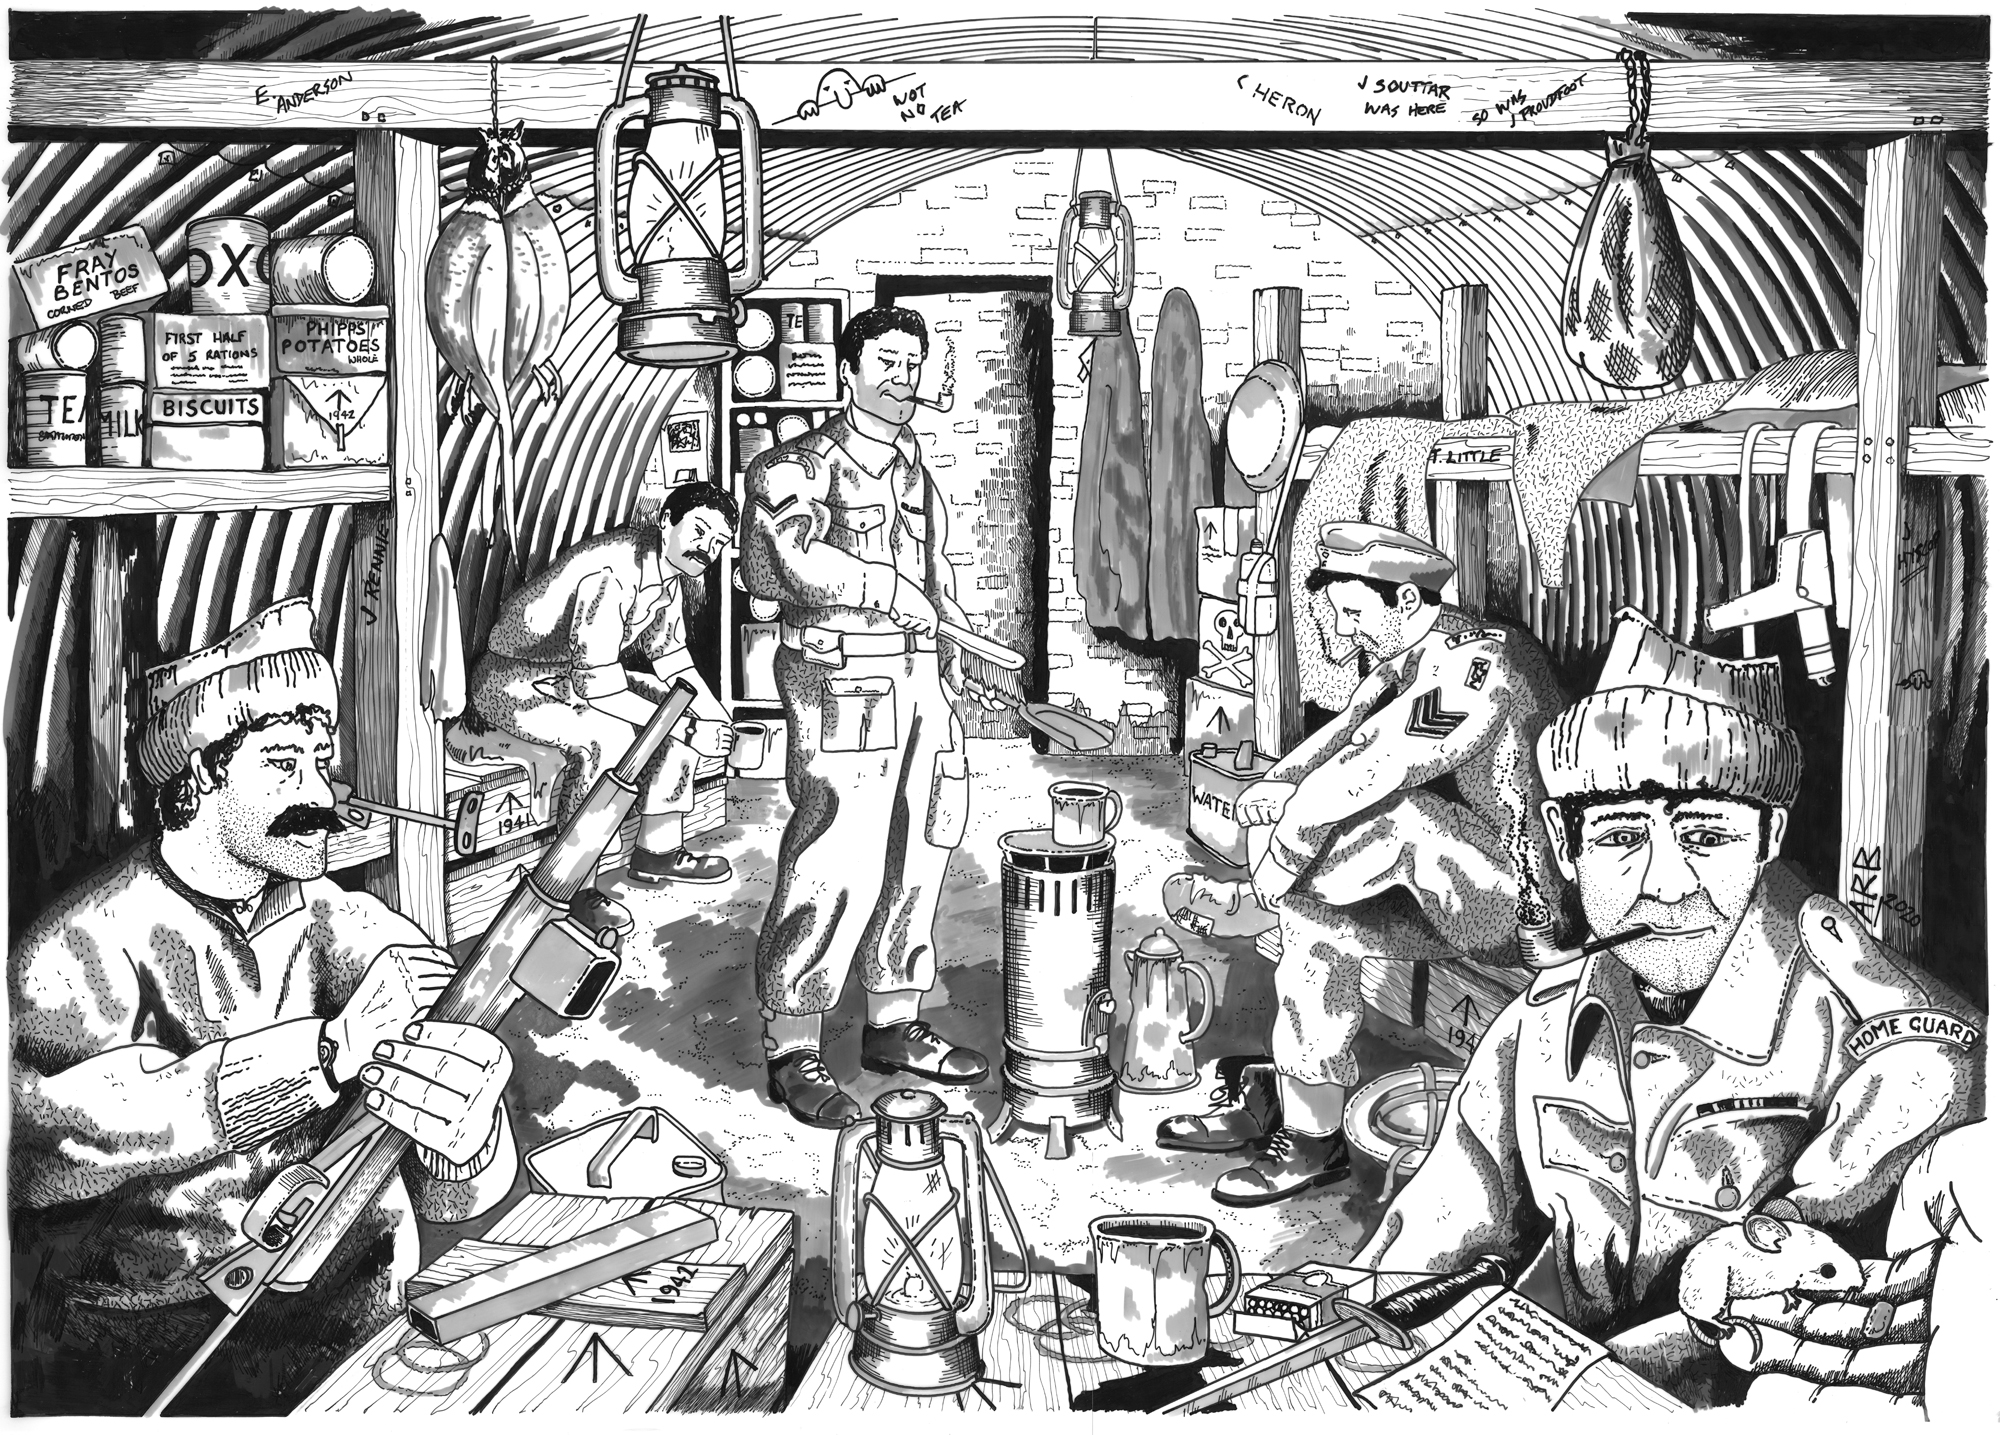 Illustration of the recently rediscovered World War Two bunker as it may have looked after a patrol, with men relaxing and eating rations